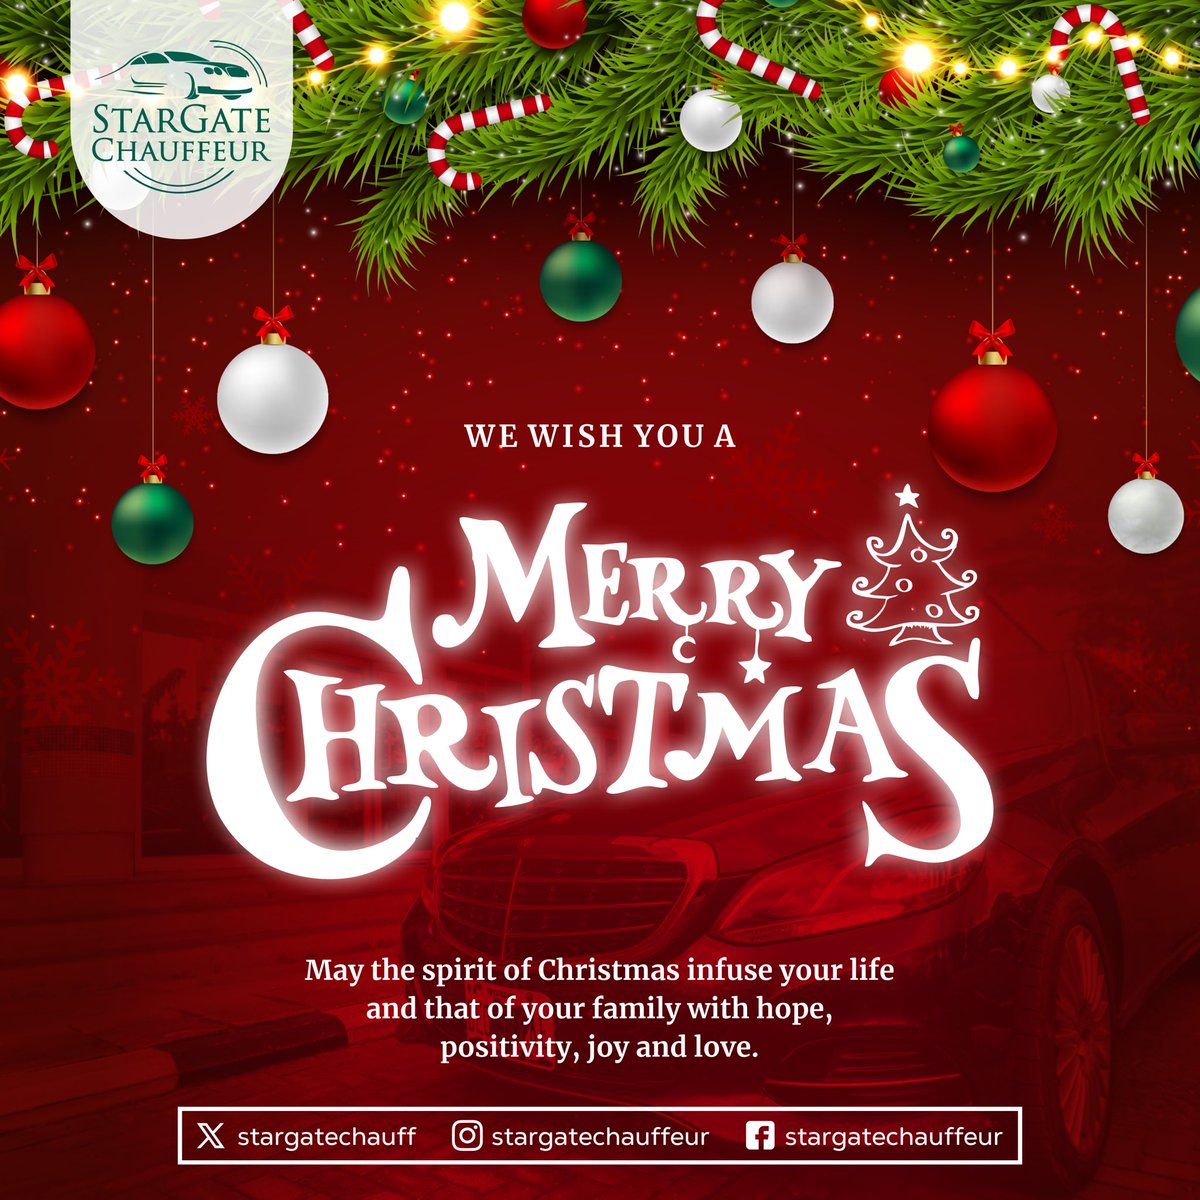 Driving holiday cheer your way! 🛞
Merry Christmas from STARGATE CHAUFFEUR, where every journey is a celebration. 🤣🎄

#merrychristmas2023 #stargatechauffeur #chauffeurinlagos